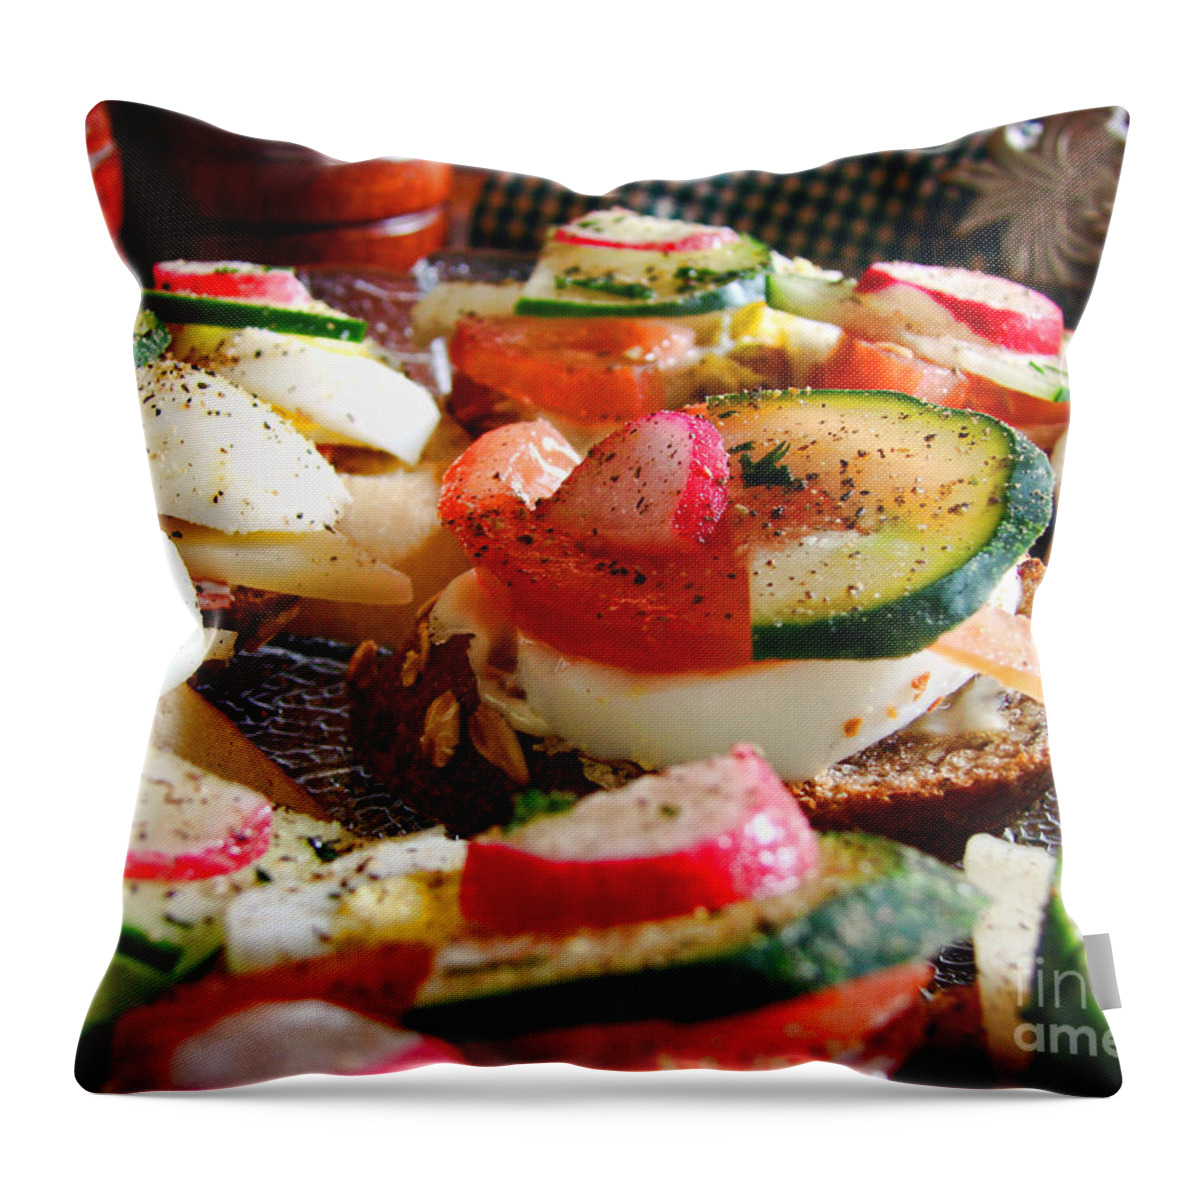 Tasty Throw Pillow featuring the photograph Amuse Bouche Plate by Olivier Le Queinec